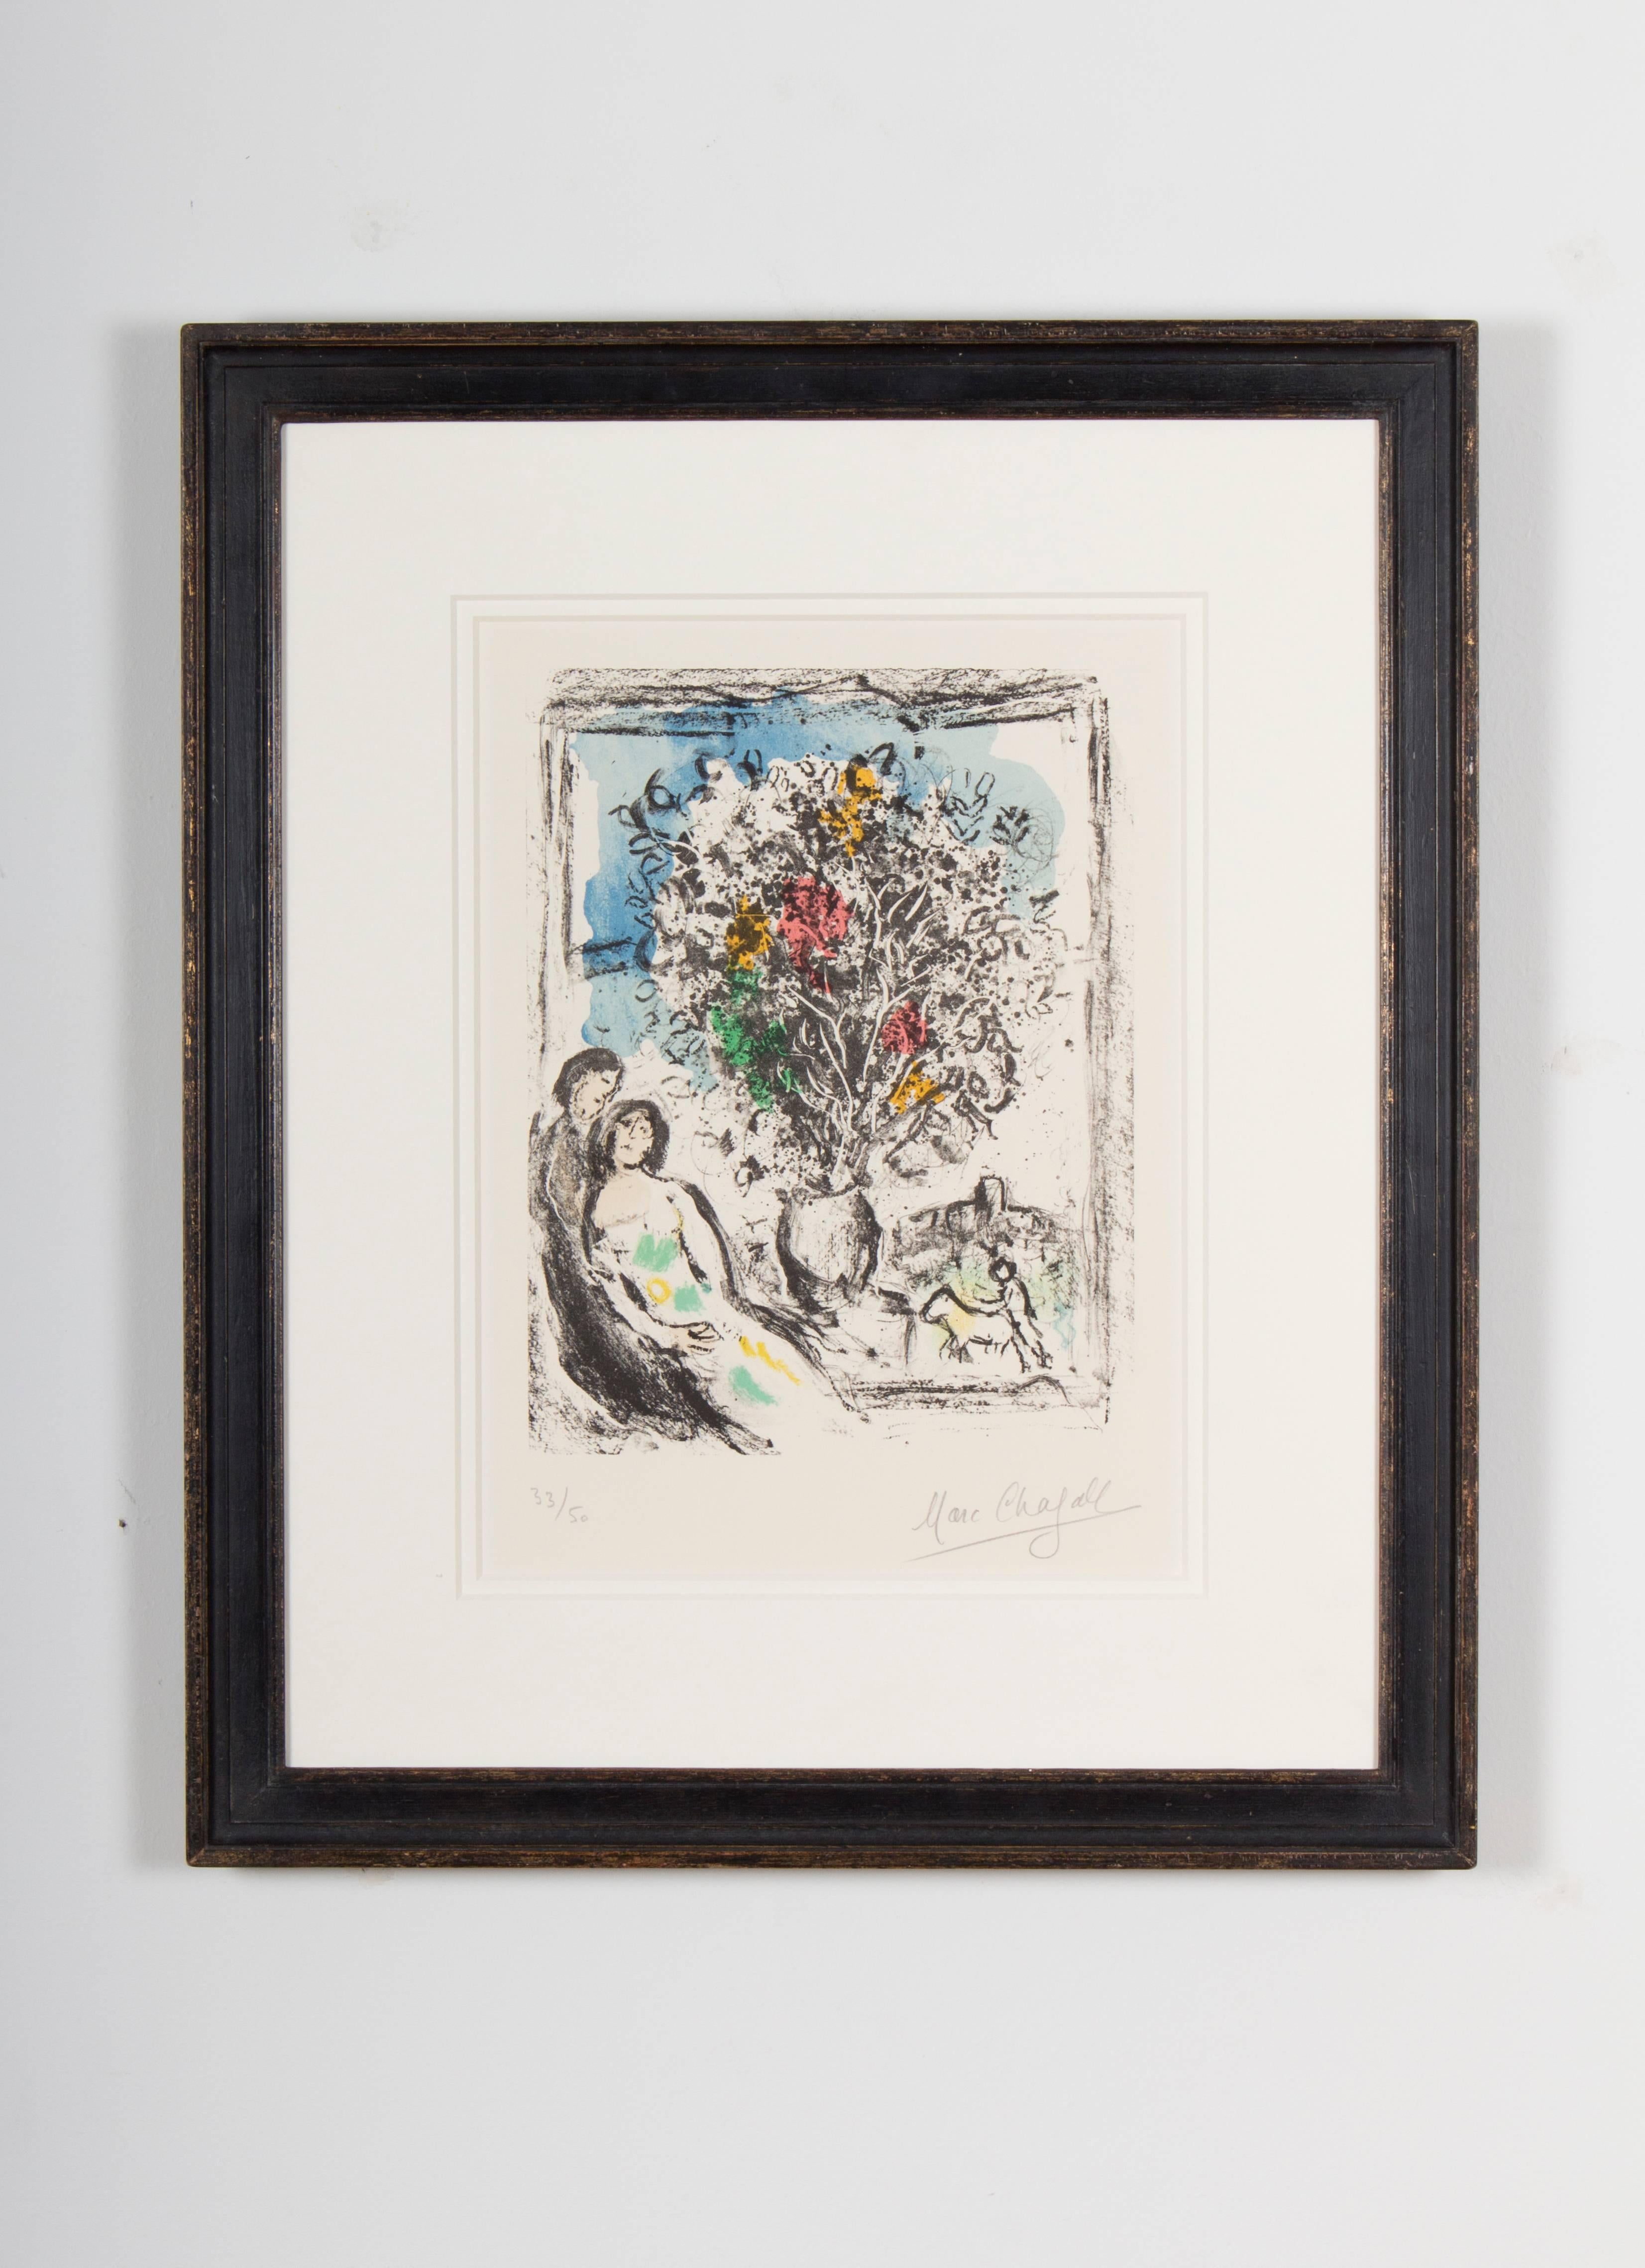 Titled in English: 'The Small Blue Window' this print was issued by Gallery Maeght and printed by the Mourlot Frères in Paris.
The work is hand signed in pencil ''Marc Chagall'' and numbered on the lower left ''33/50''.

Technique: color lithograph